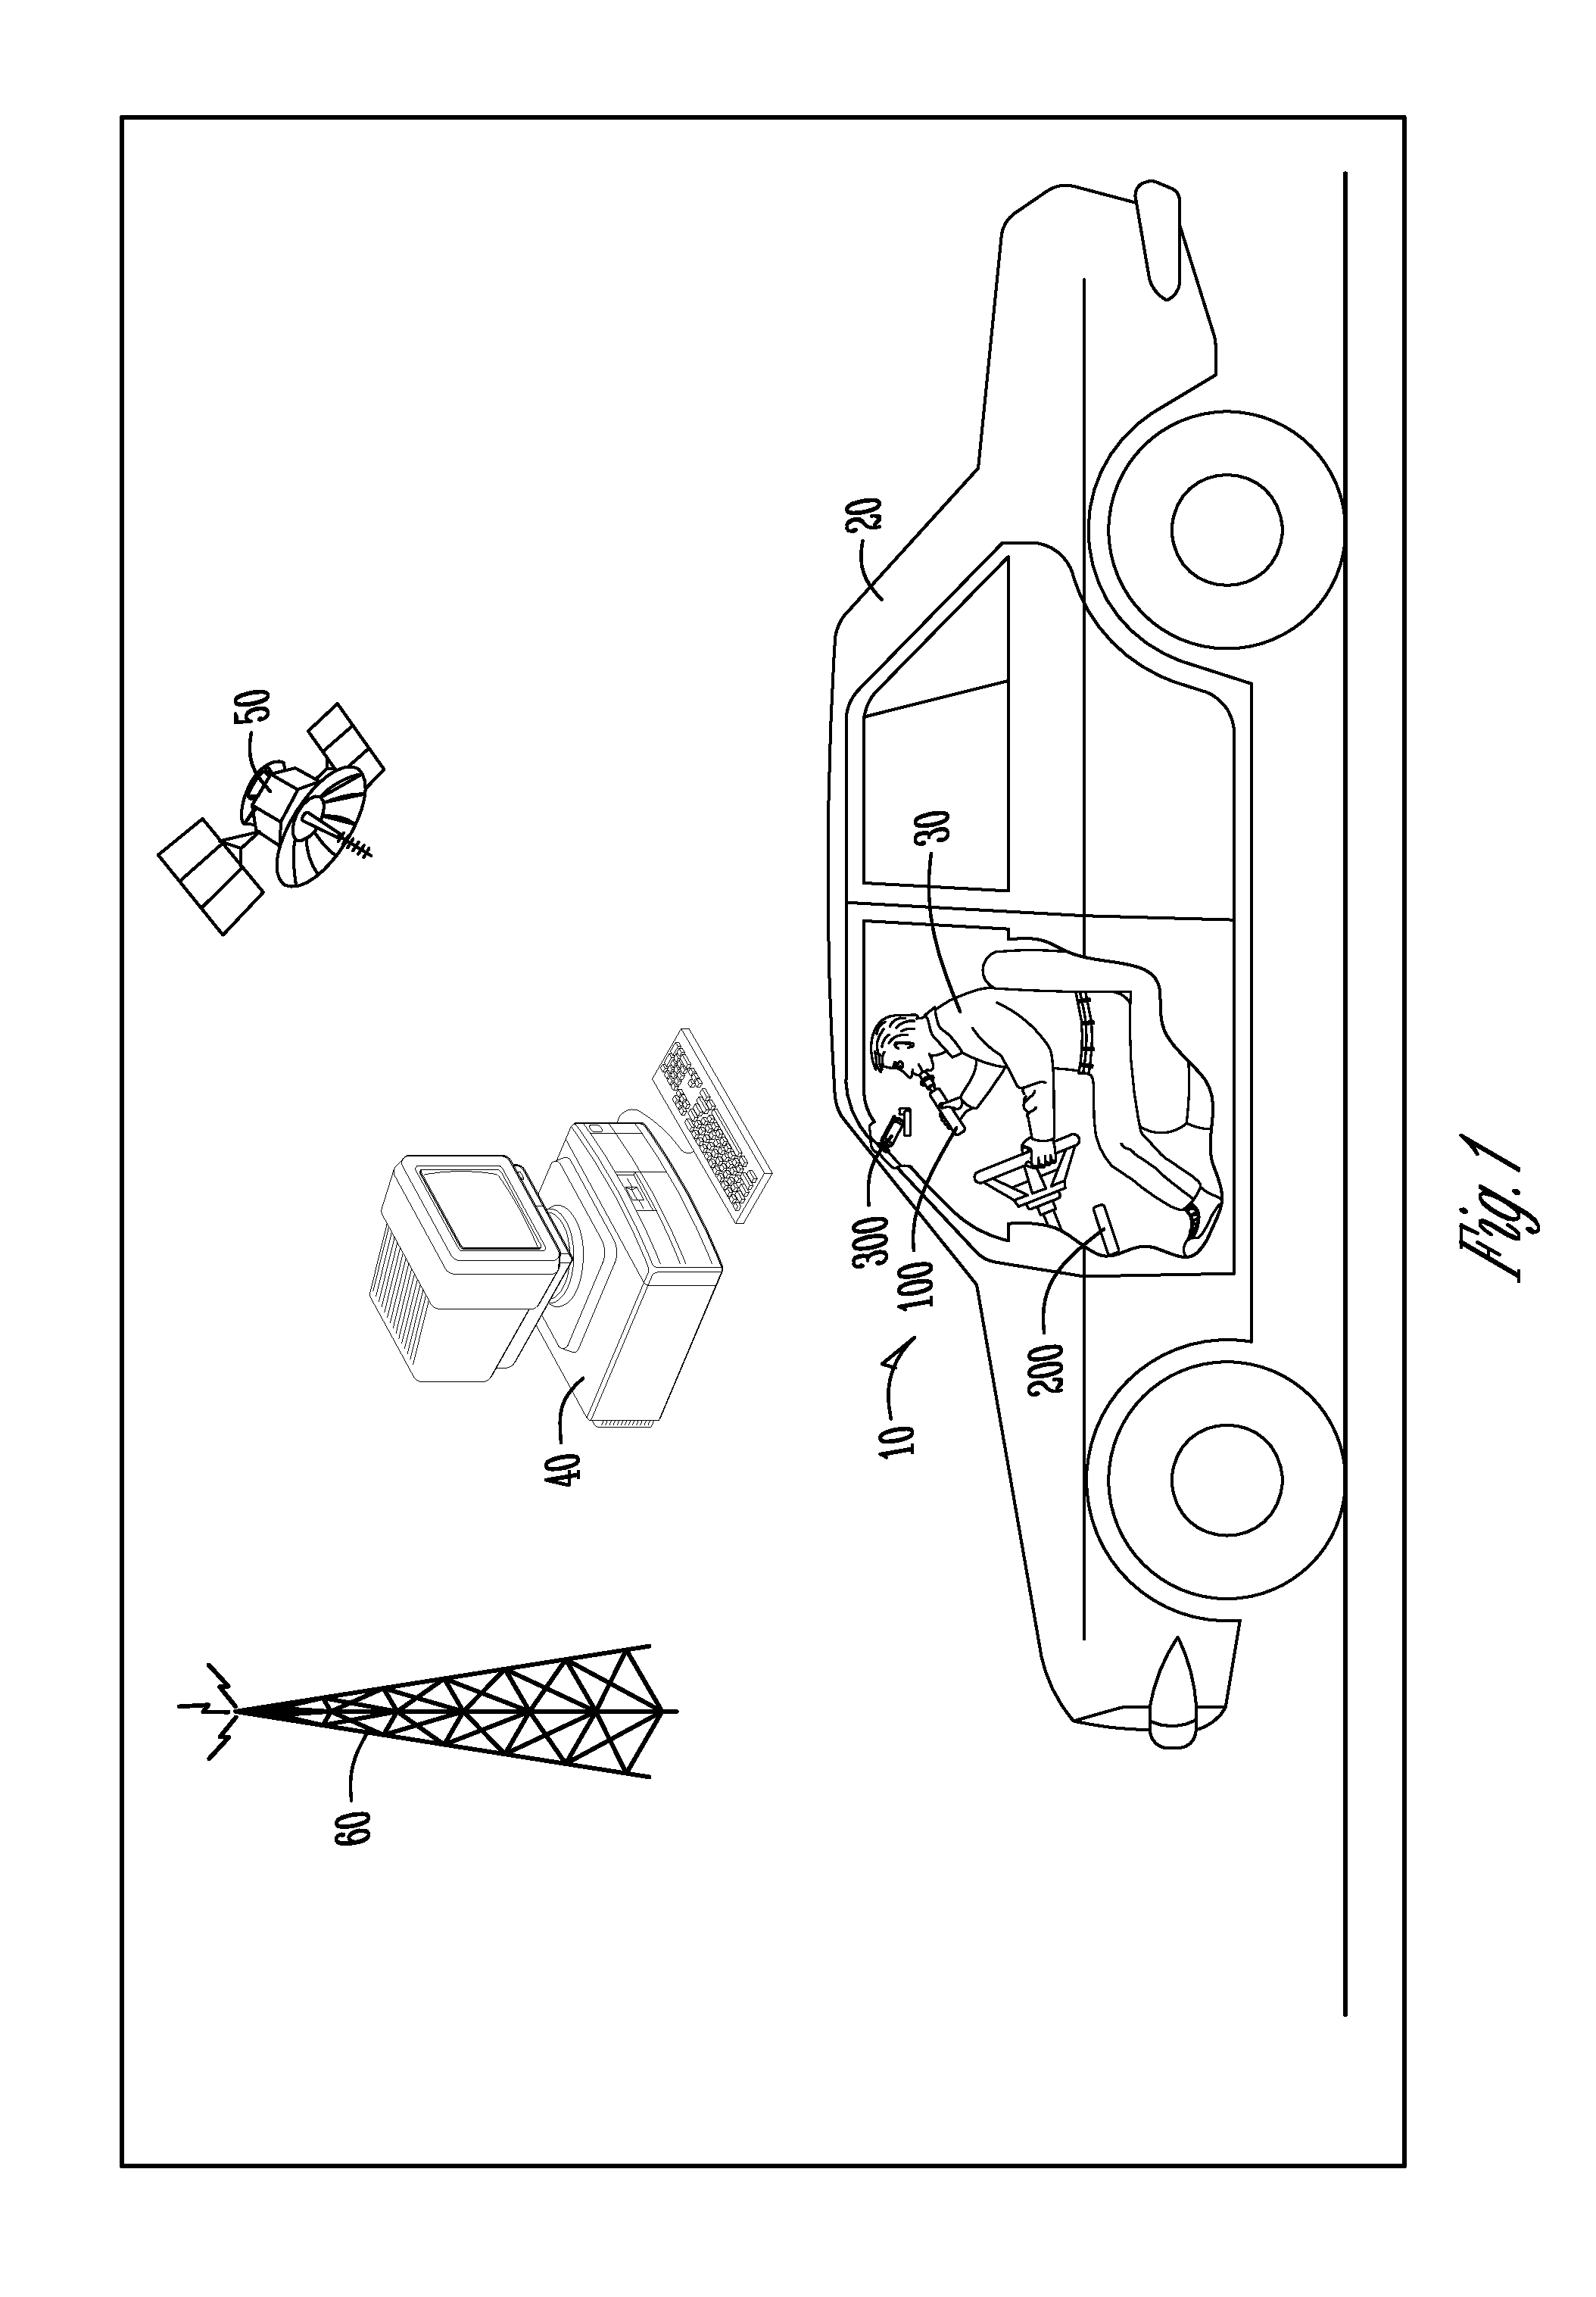 Apparatus, system, and method for implementing and monitoring breath alcohol testing programs, usually from a fixed point location, such as a home